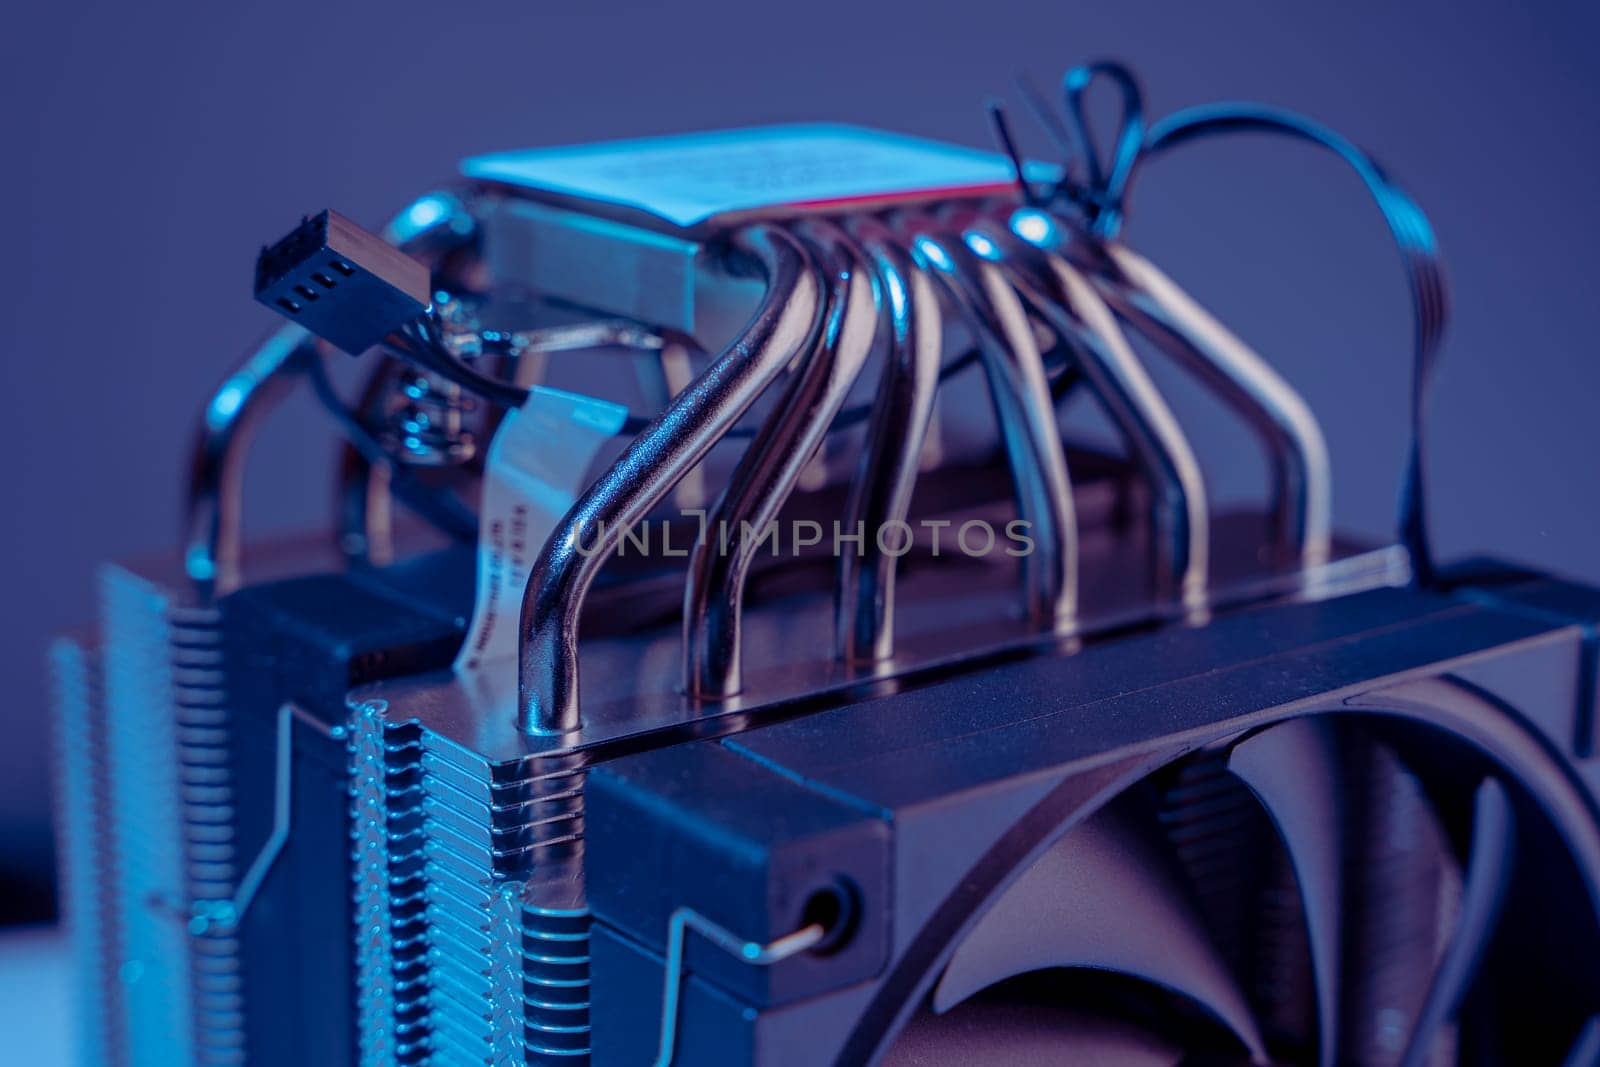 Computer fan. modern powerful cooler for cooling the CPU by audiznam2609